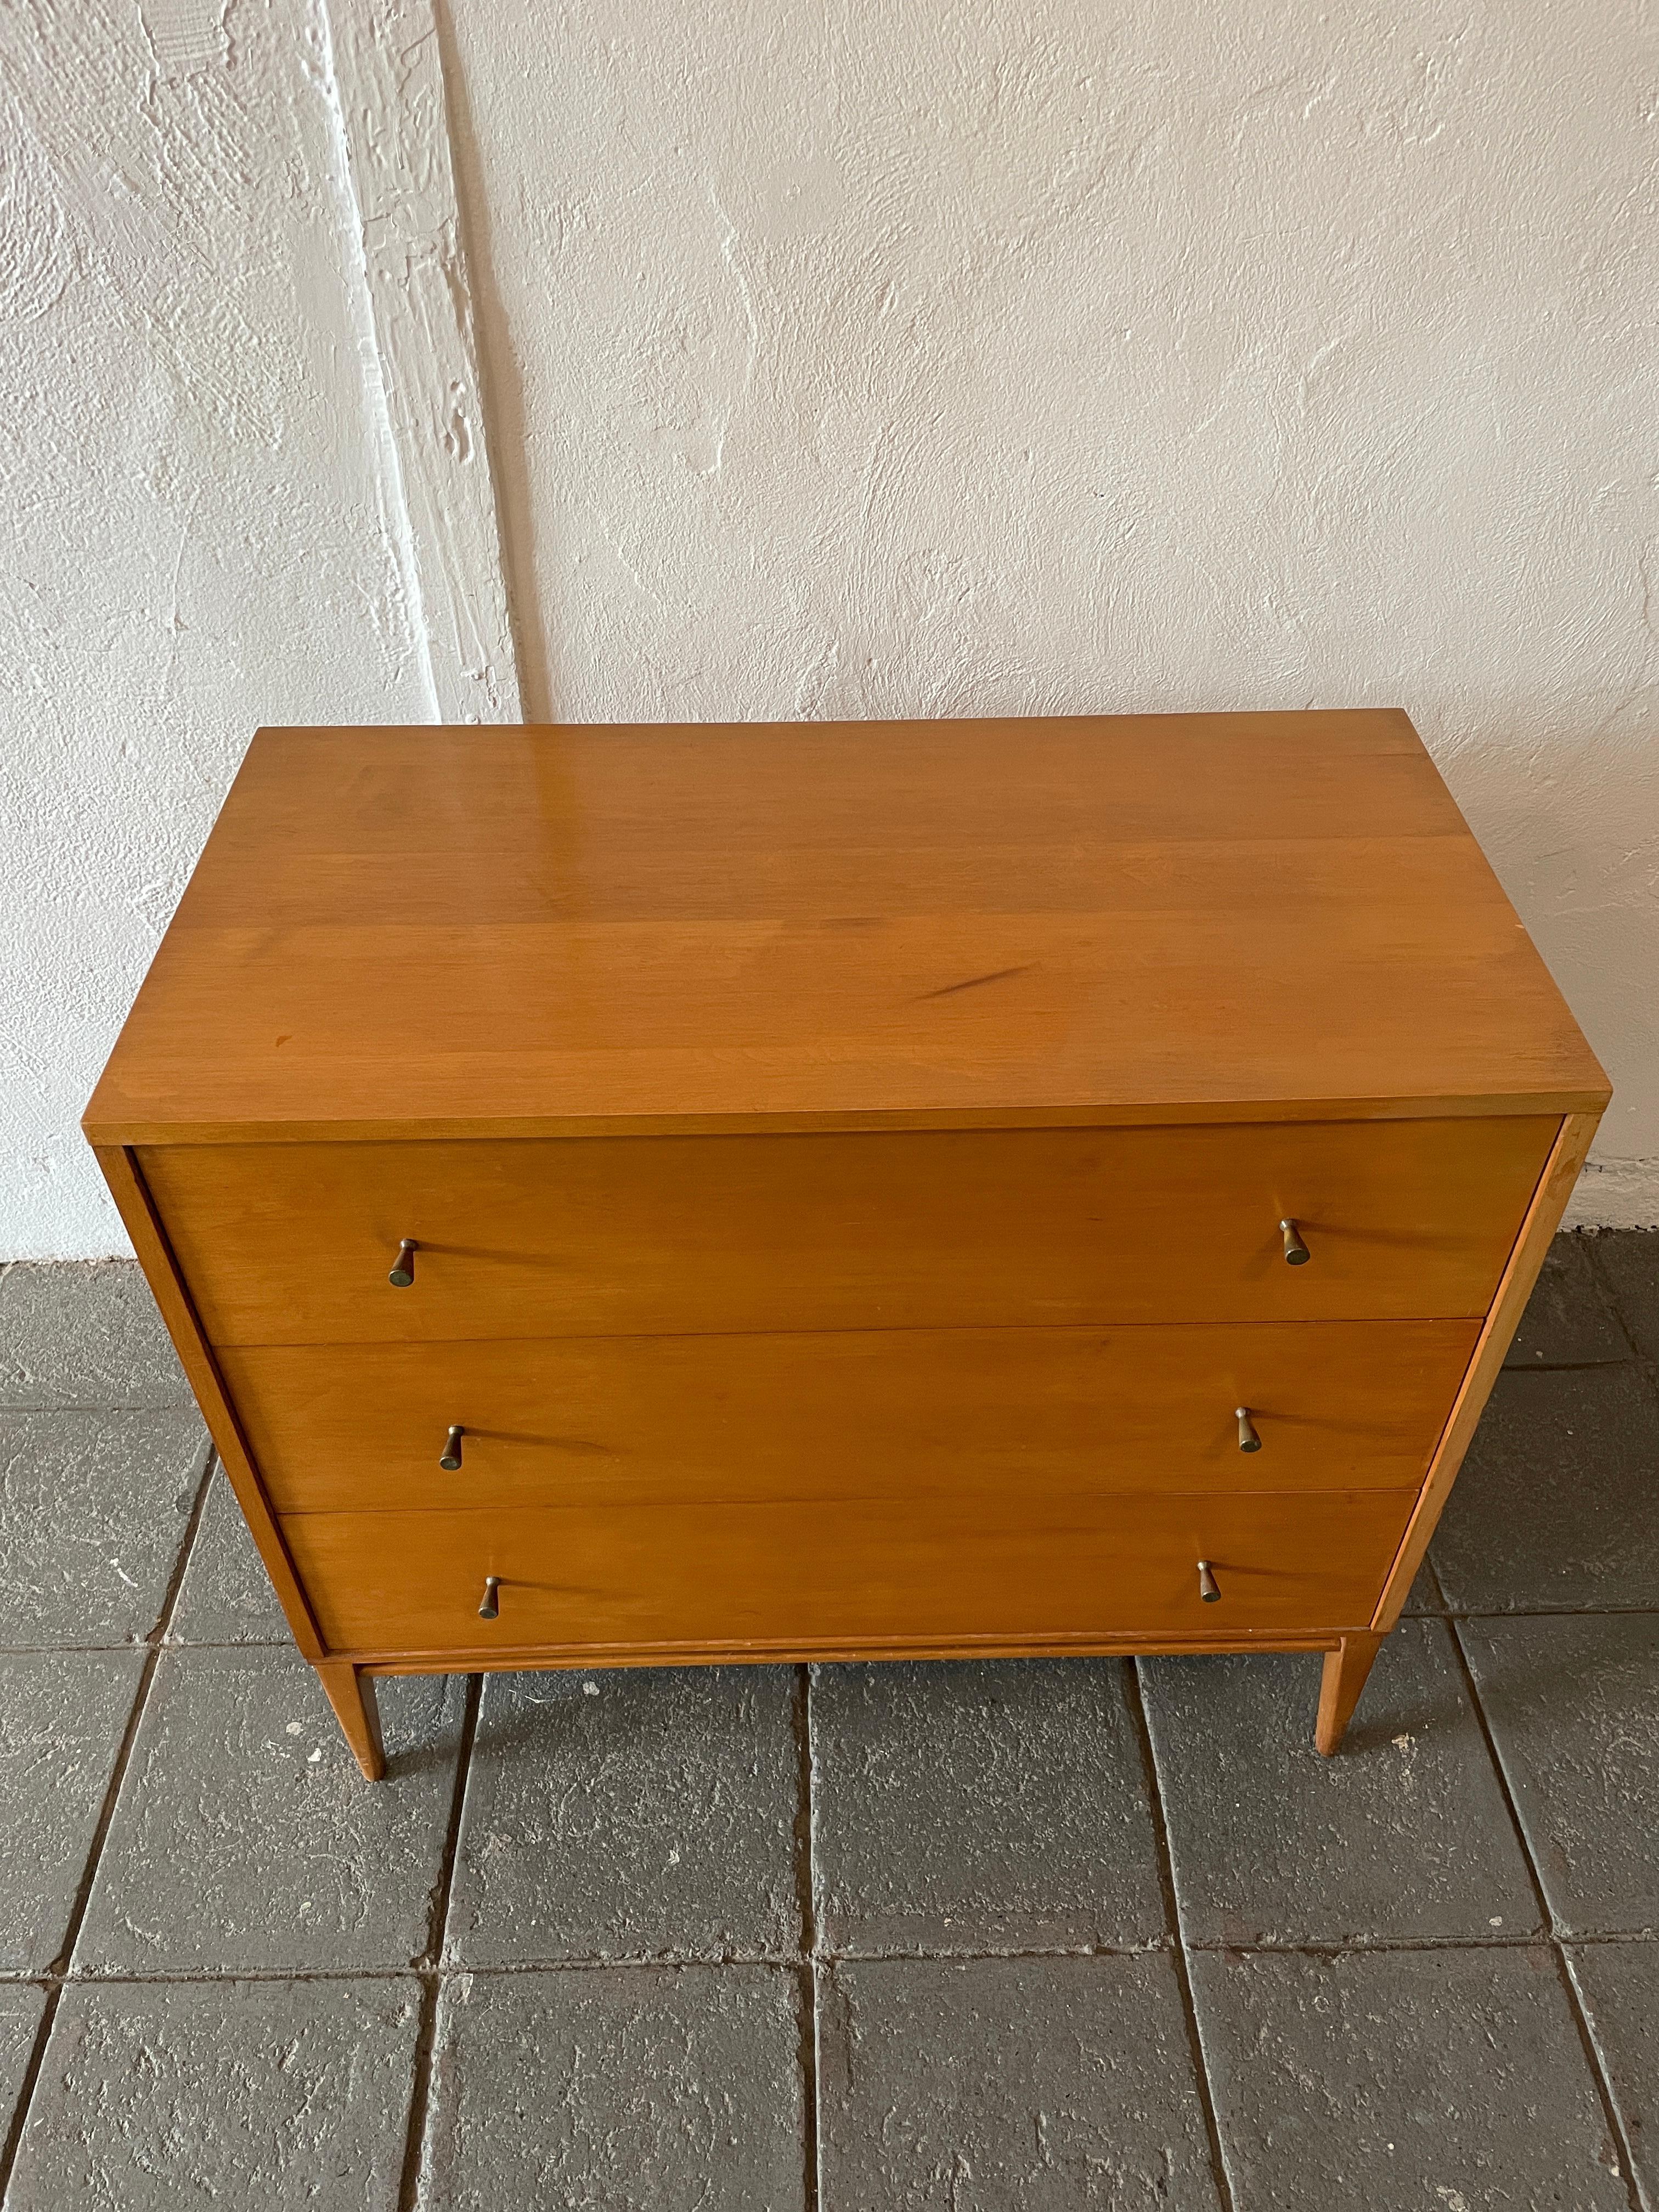 Vintage mid-century Paul McCobb 3-drawer dresser Planner Group #1508. Beautiful dresser by Paul McCobb circa 1950s Planner Group, 3 drawer, solid maple, blonde finish, brass pulls, Wood legs base. Clean inside and out all drawers slide smooth.